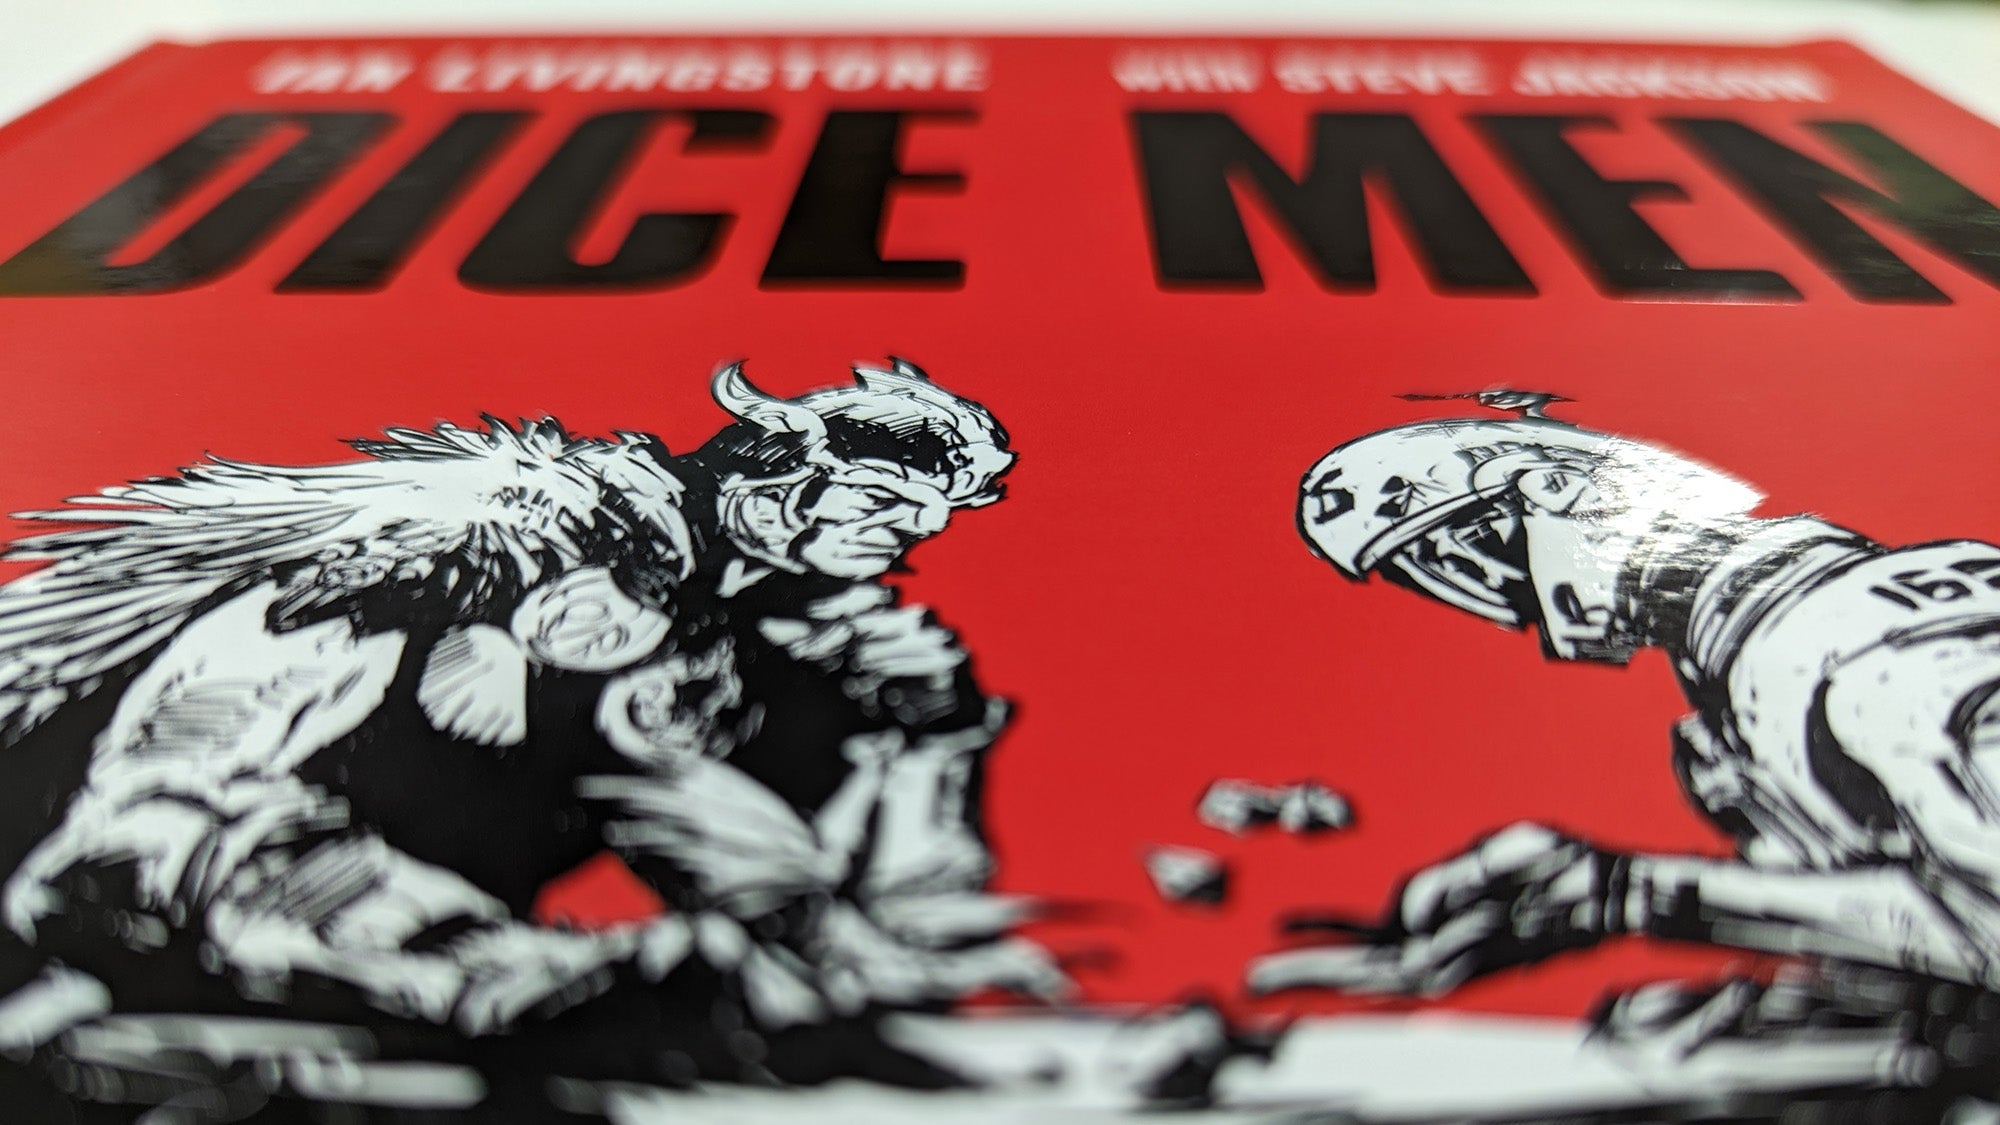 A photo of the Dice Men Games Workshop history book. It's red with two characters fantastical characters playing dice on the front cover. It's the classic Ian McCaig illustration that was on early Games Workshop bags.